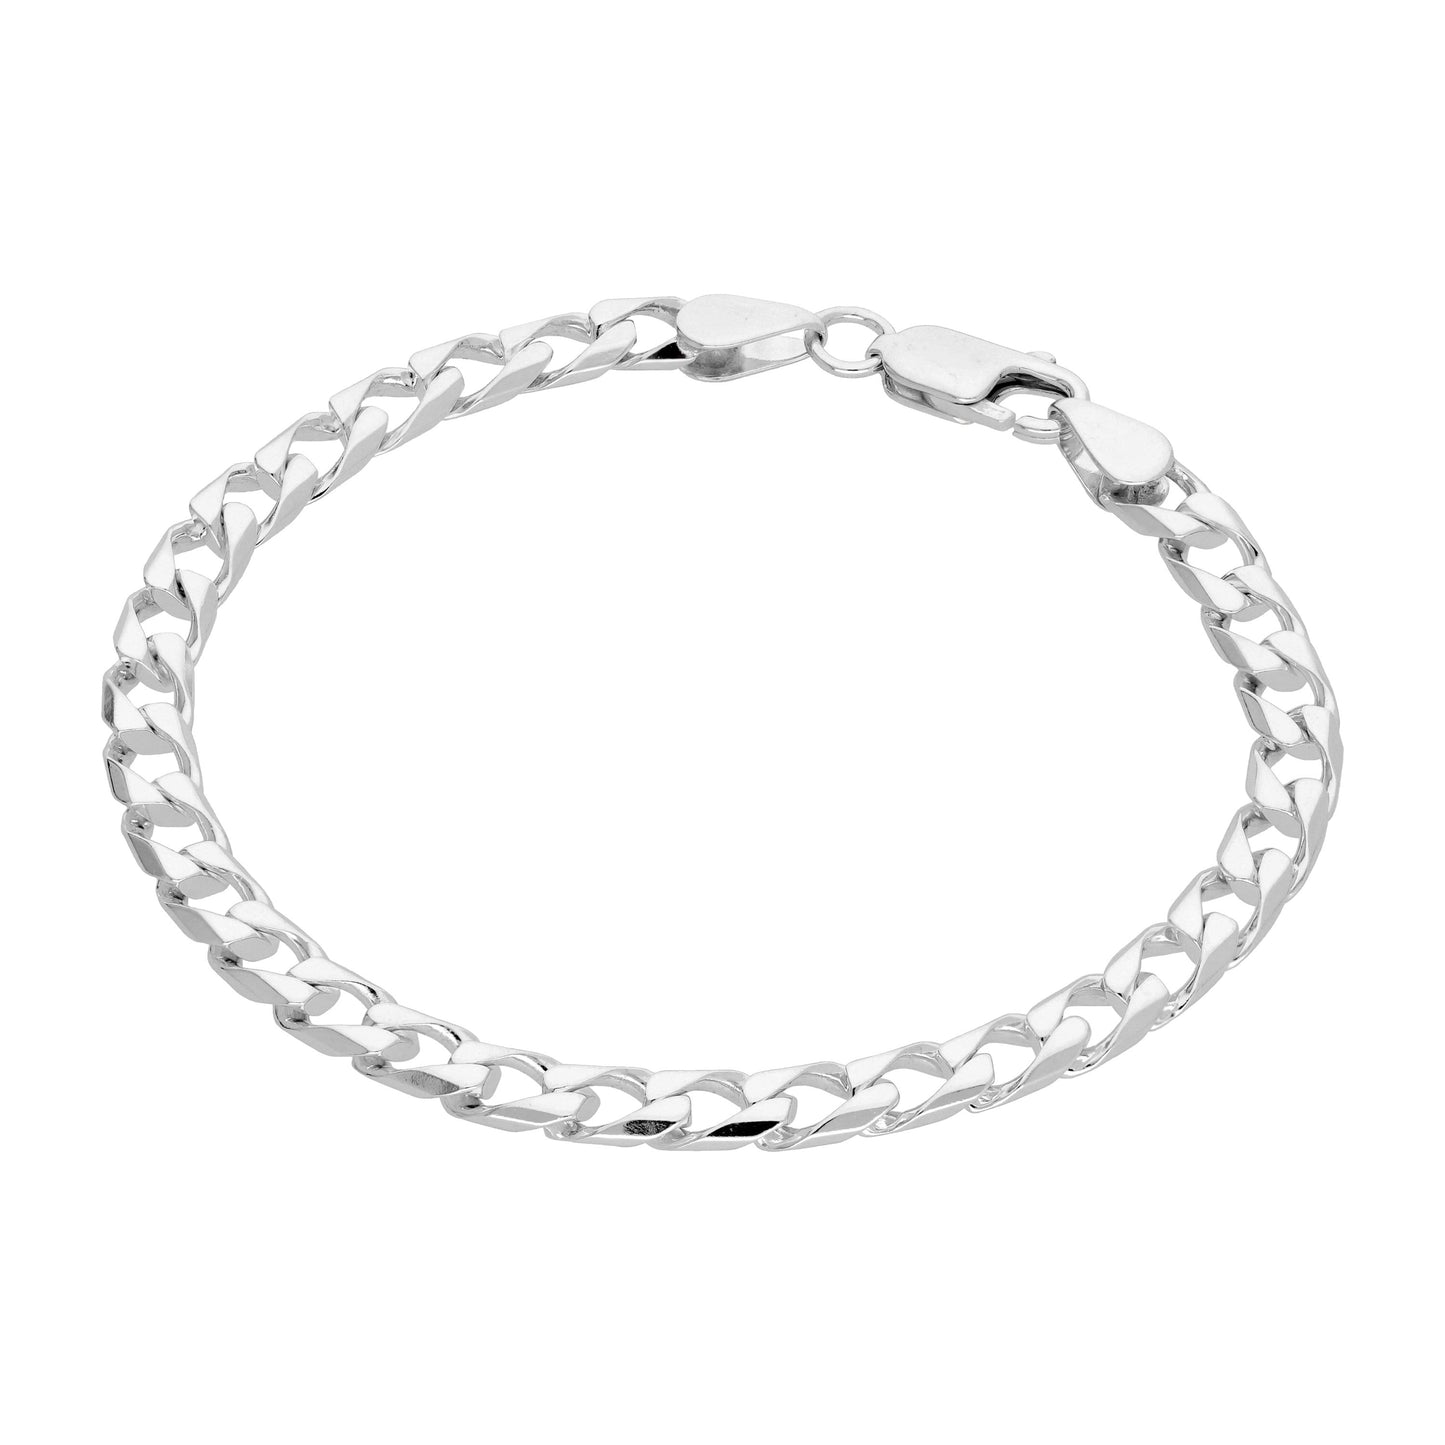 Sterling Silver Flat 5mm Curb Link Chain Bracelet 7.5 Inches